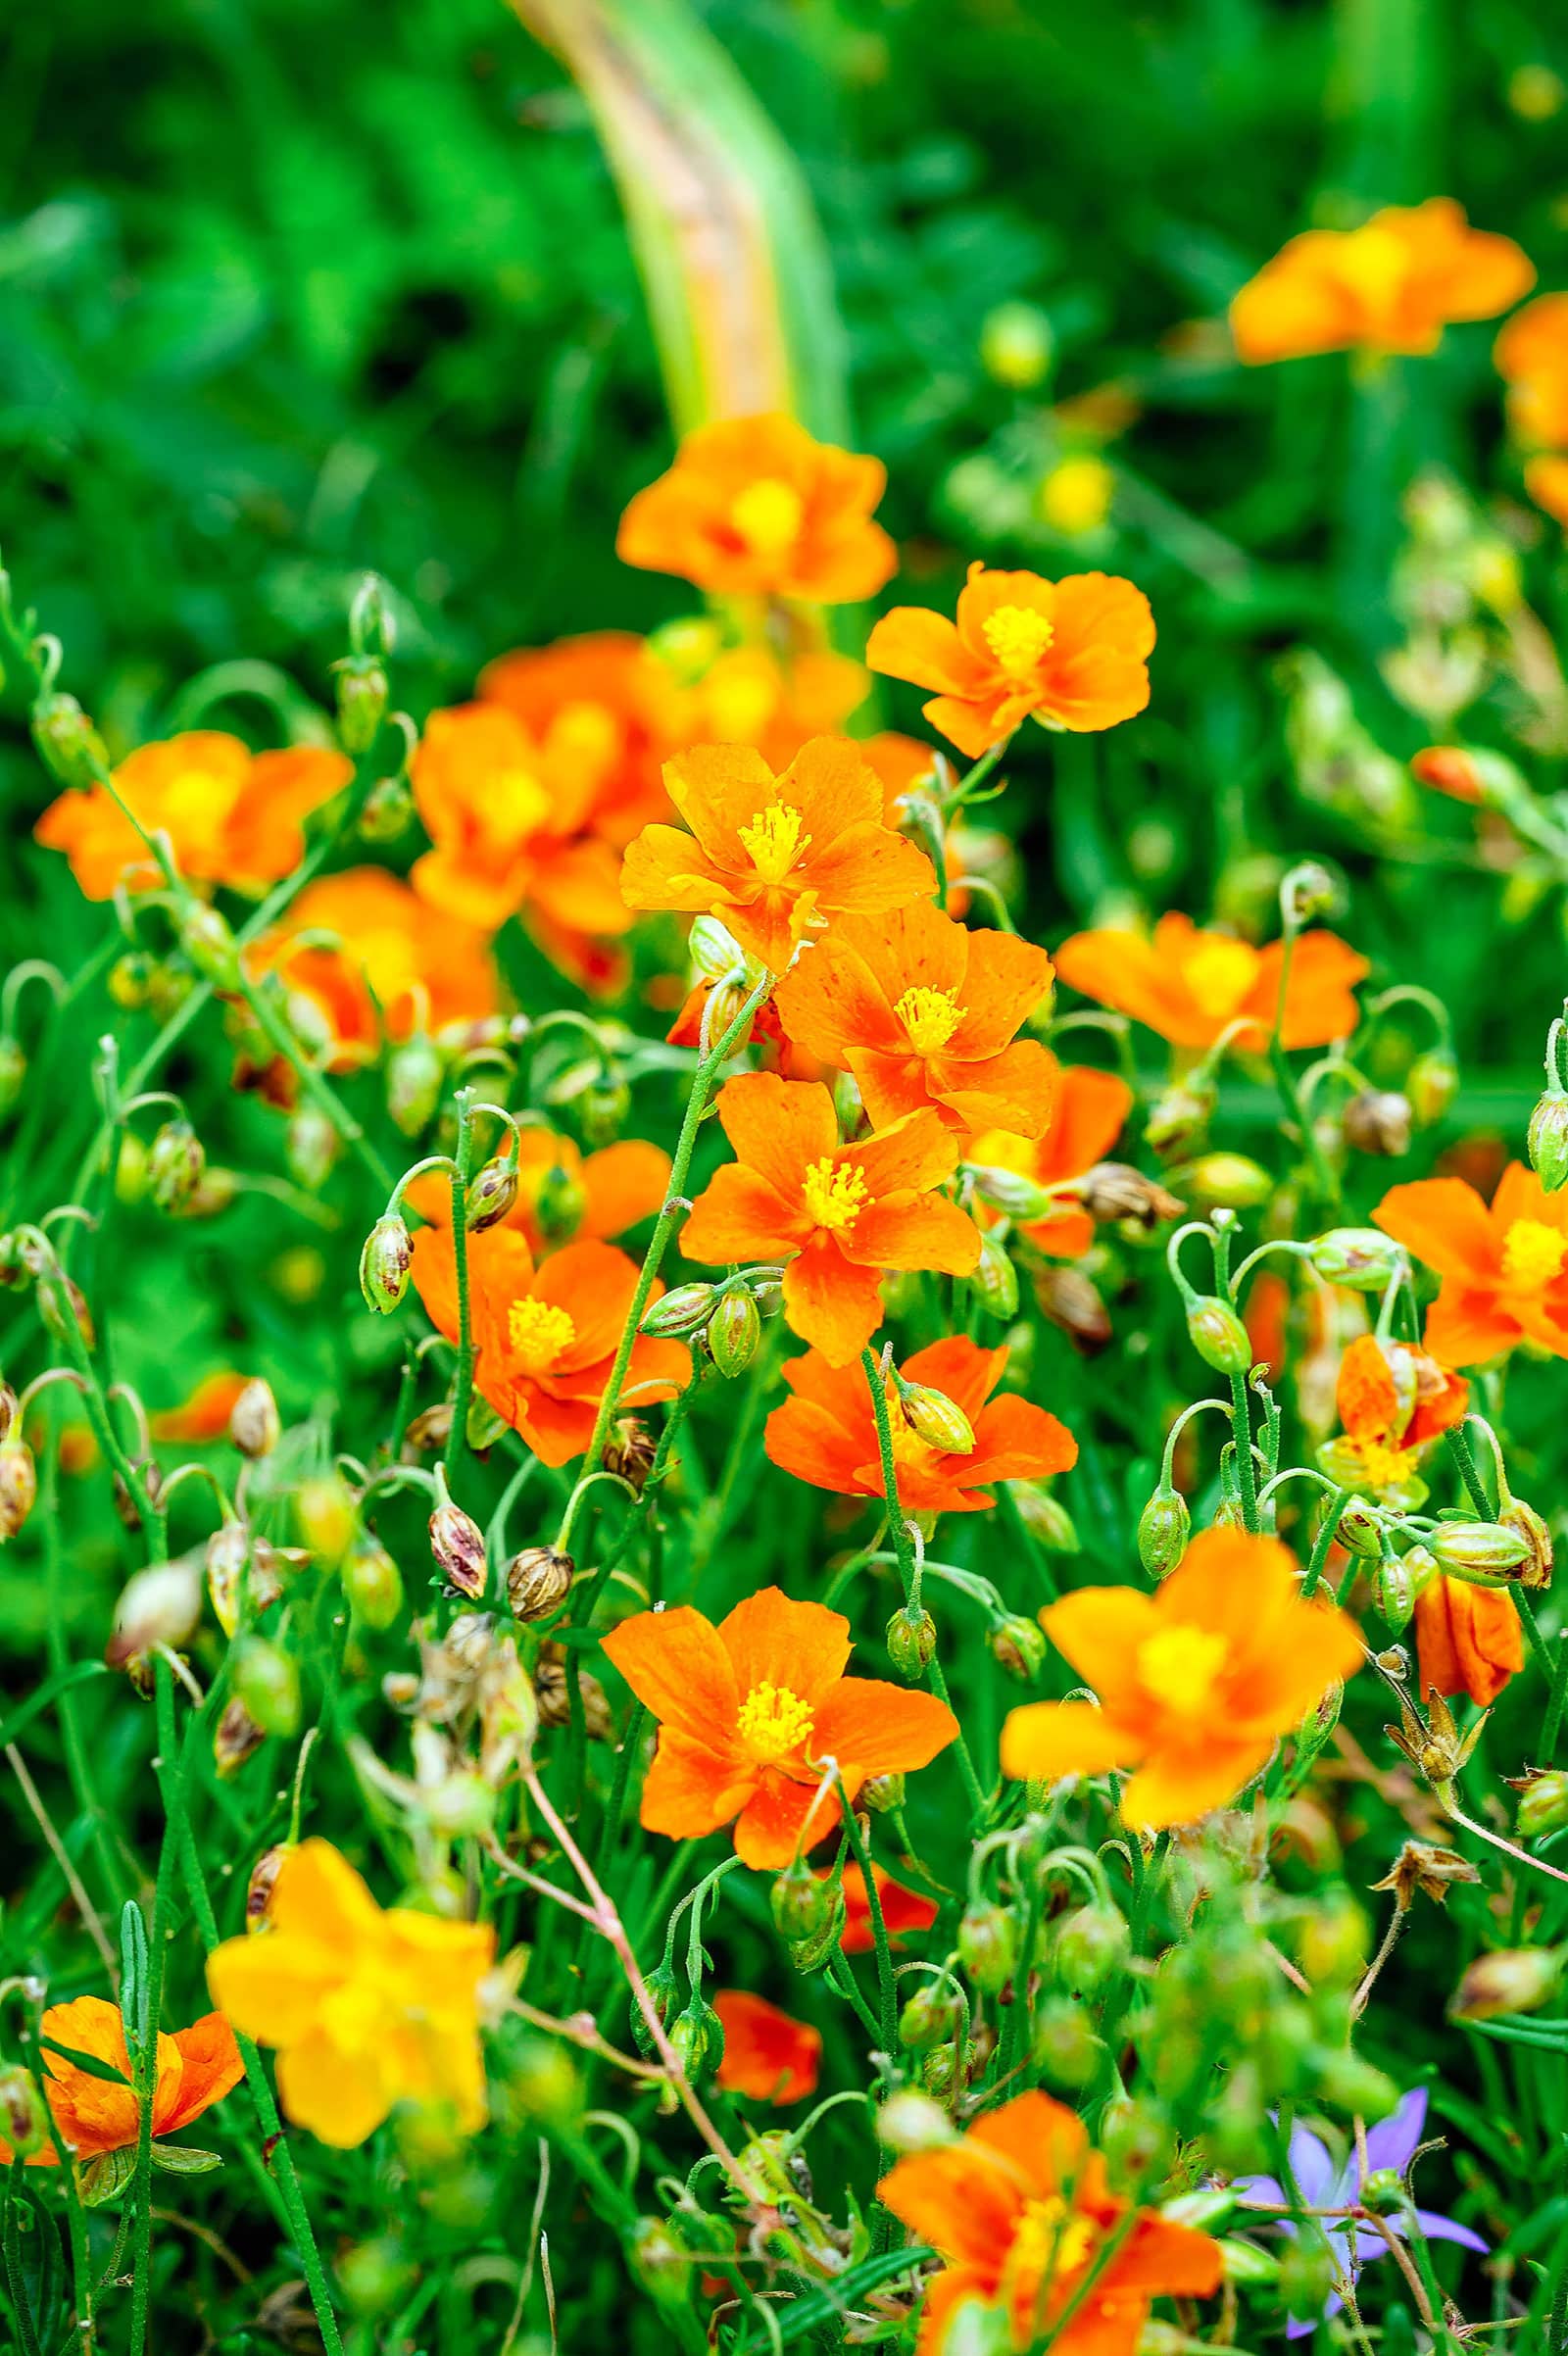 Rock rose ground cover with orange flowers in bloom